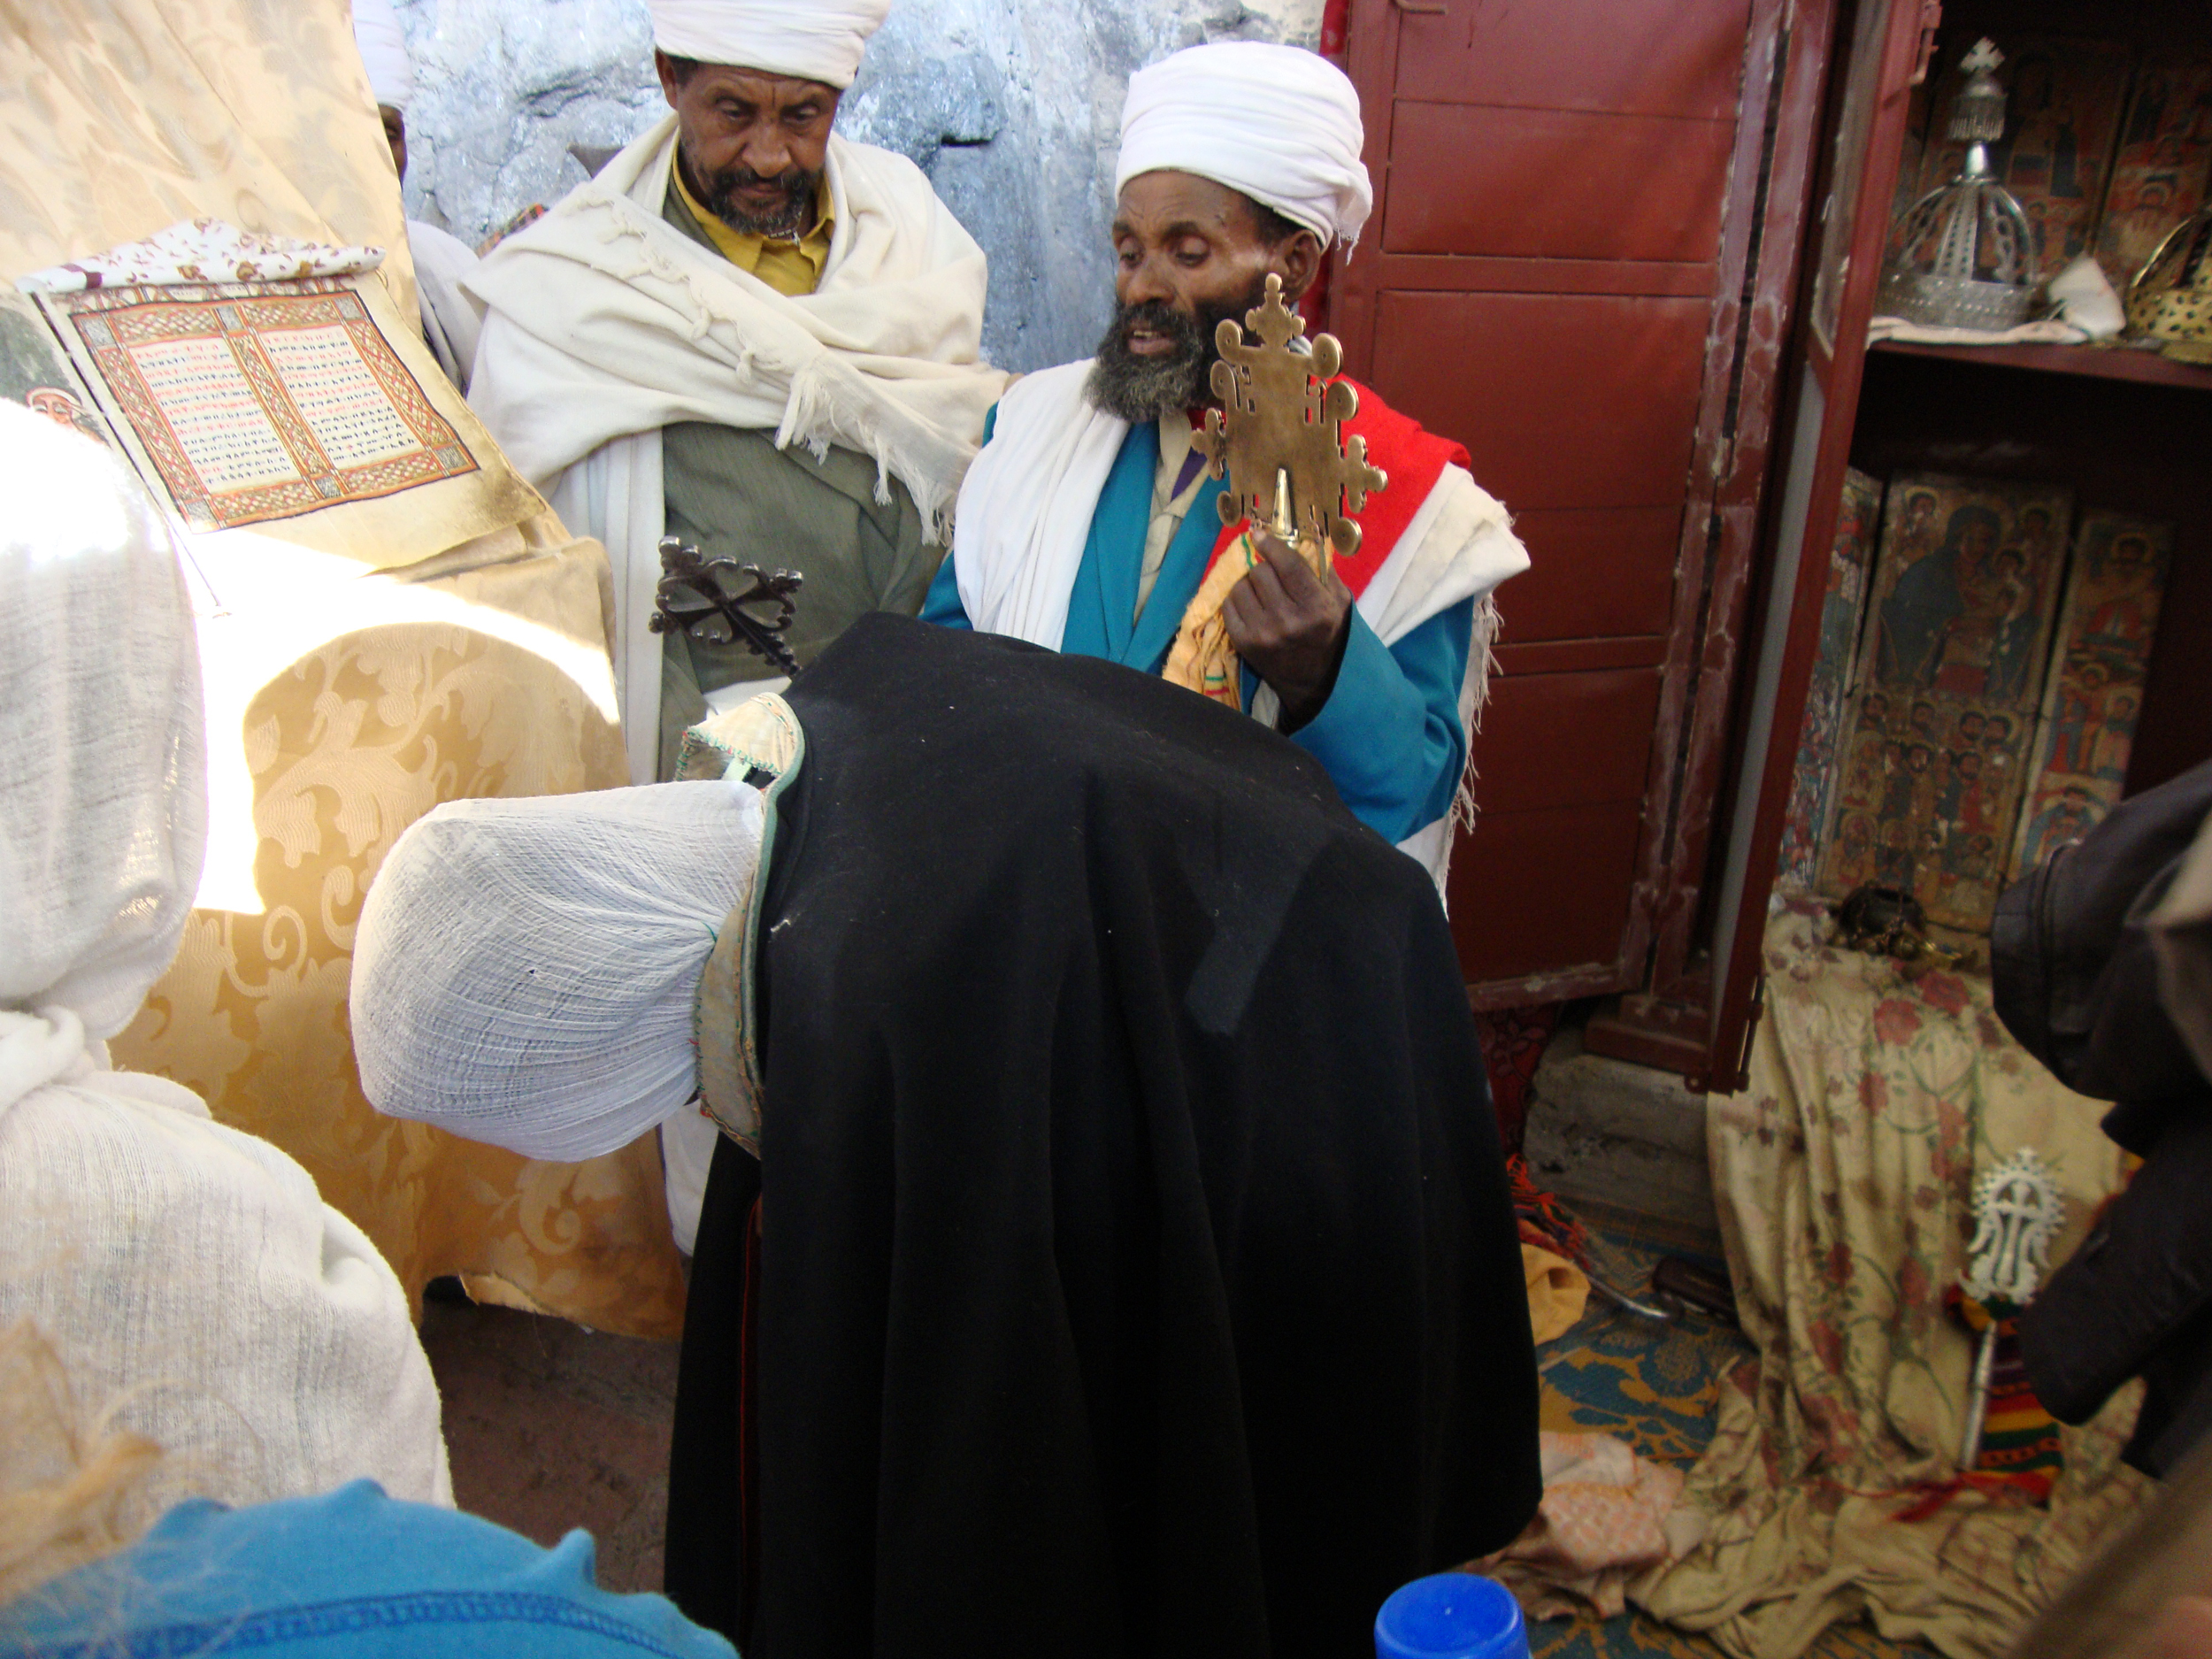 An Ethiopian priest blessing a woman with a copy of the gospels on her back, in a ceremony to bring her fertility. Photograph by Maia Sheridan, January 2013.